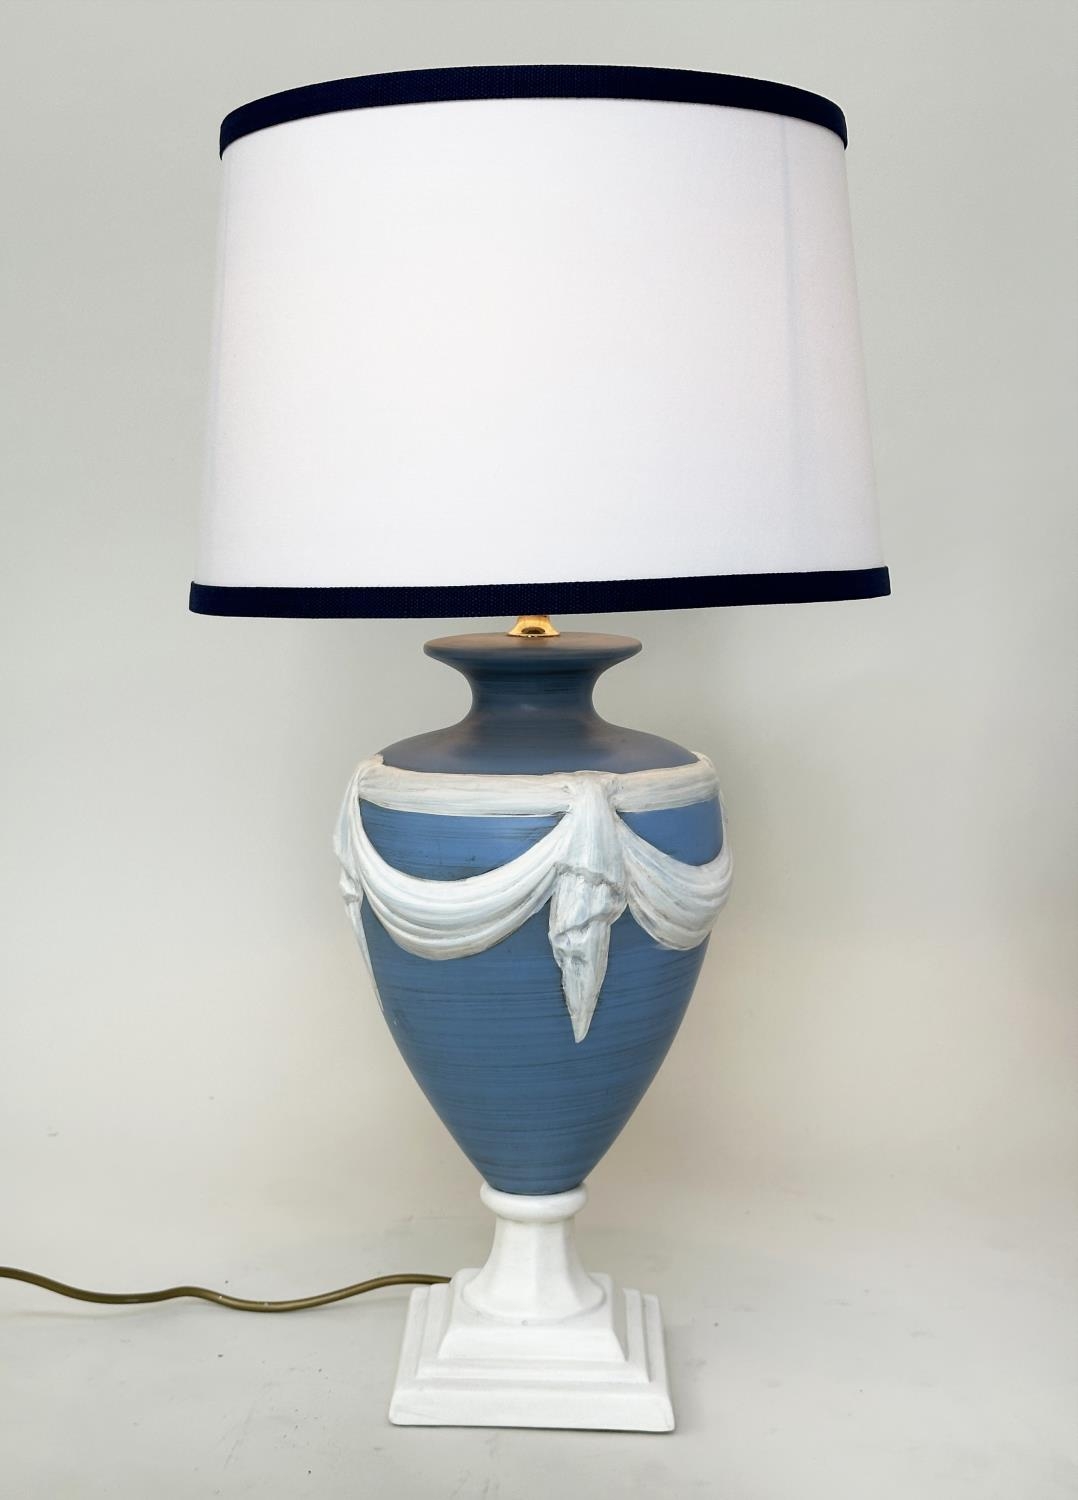 TABLE LAMPS, a pair, Wedgwood jasperware style of vase form with shades, 70cm H. - Image 9 of 12